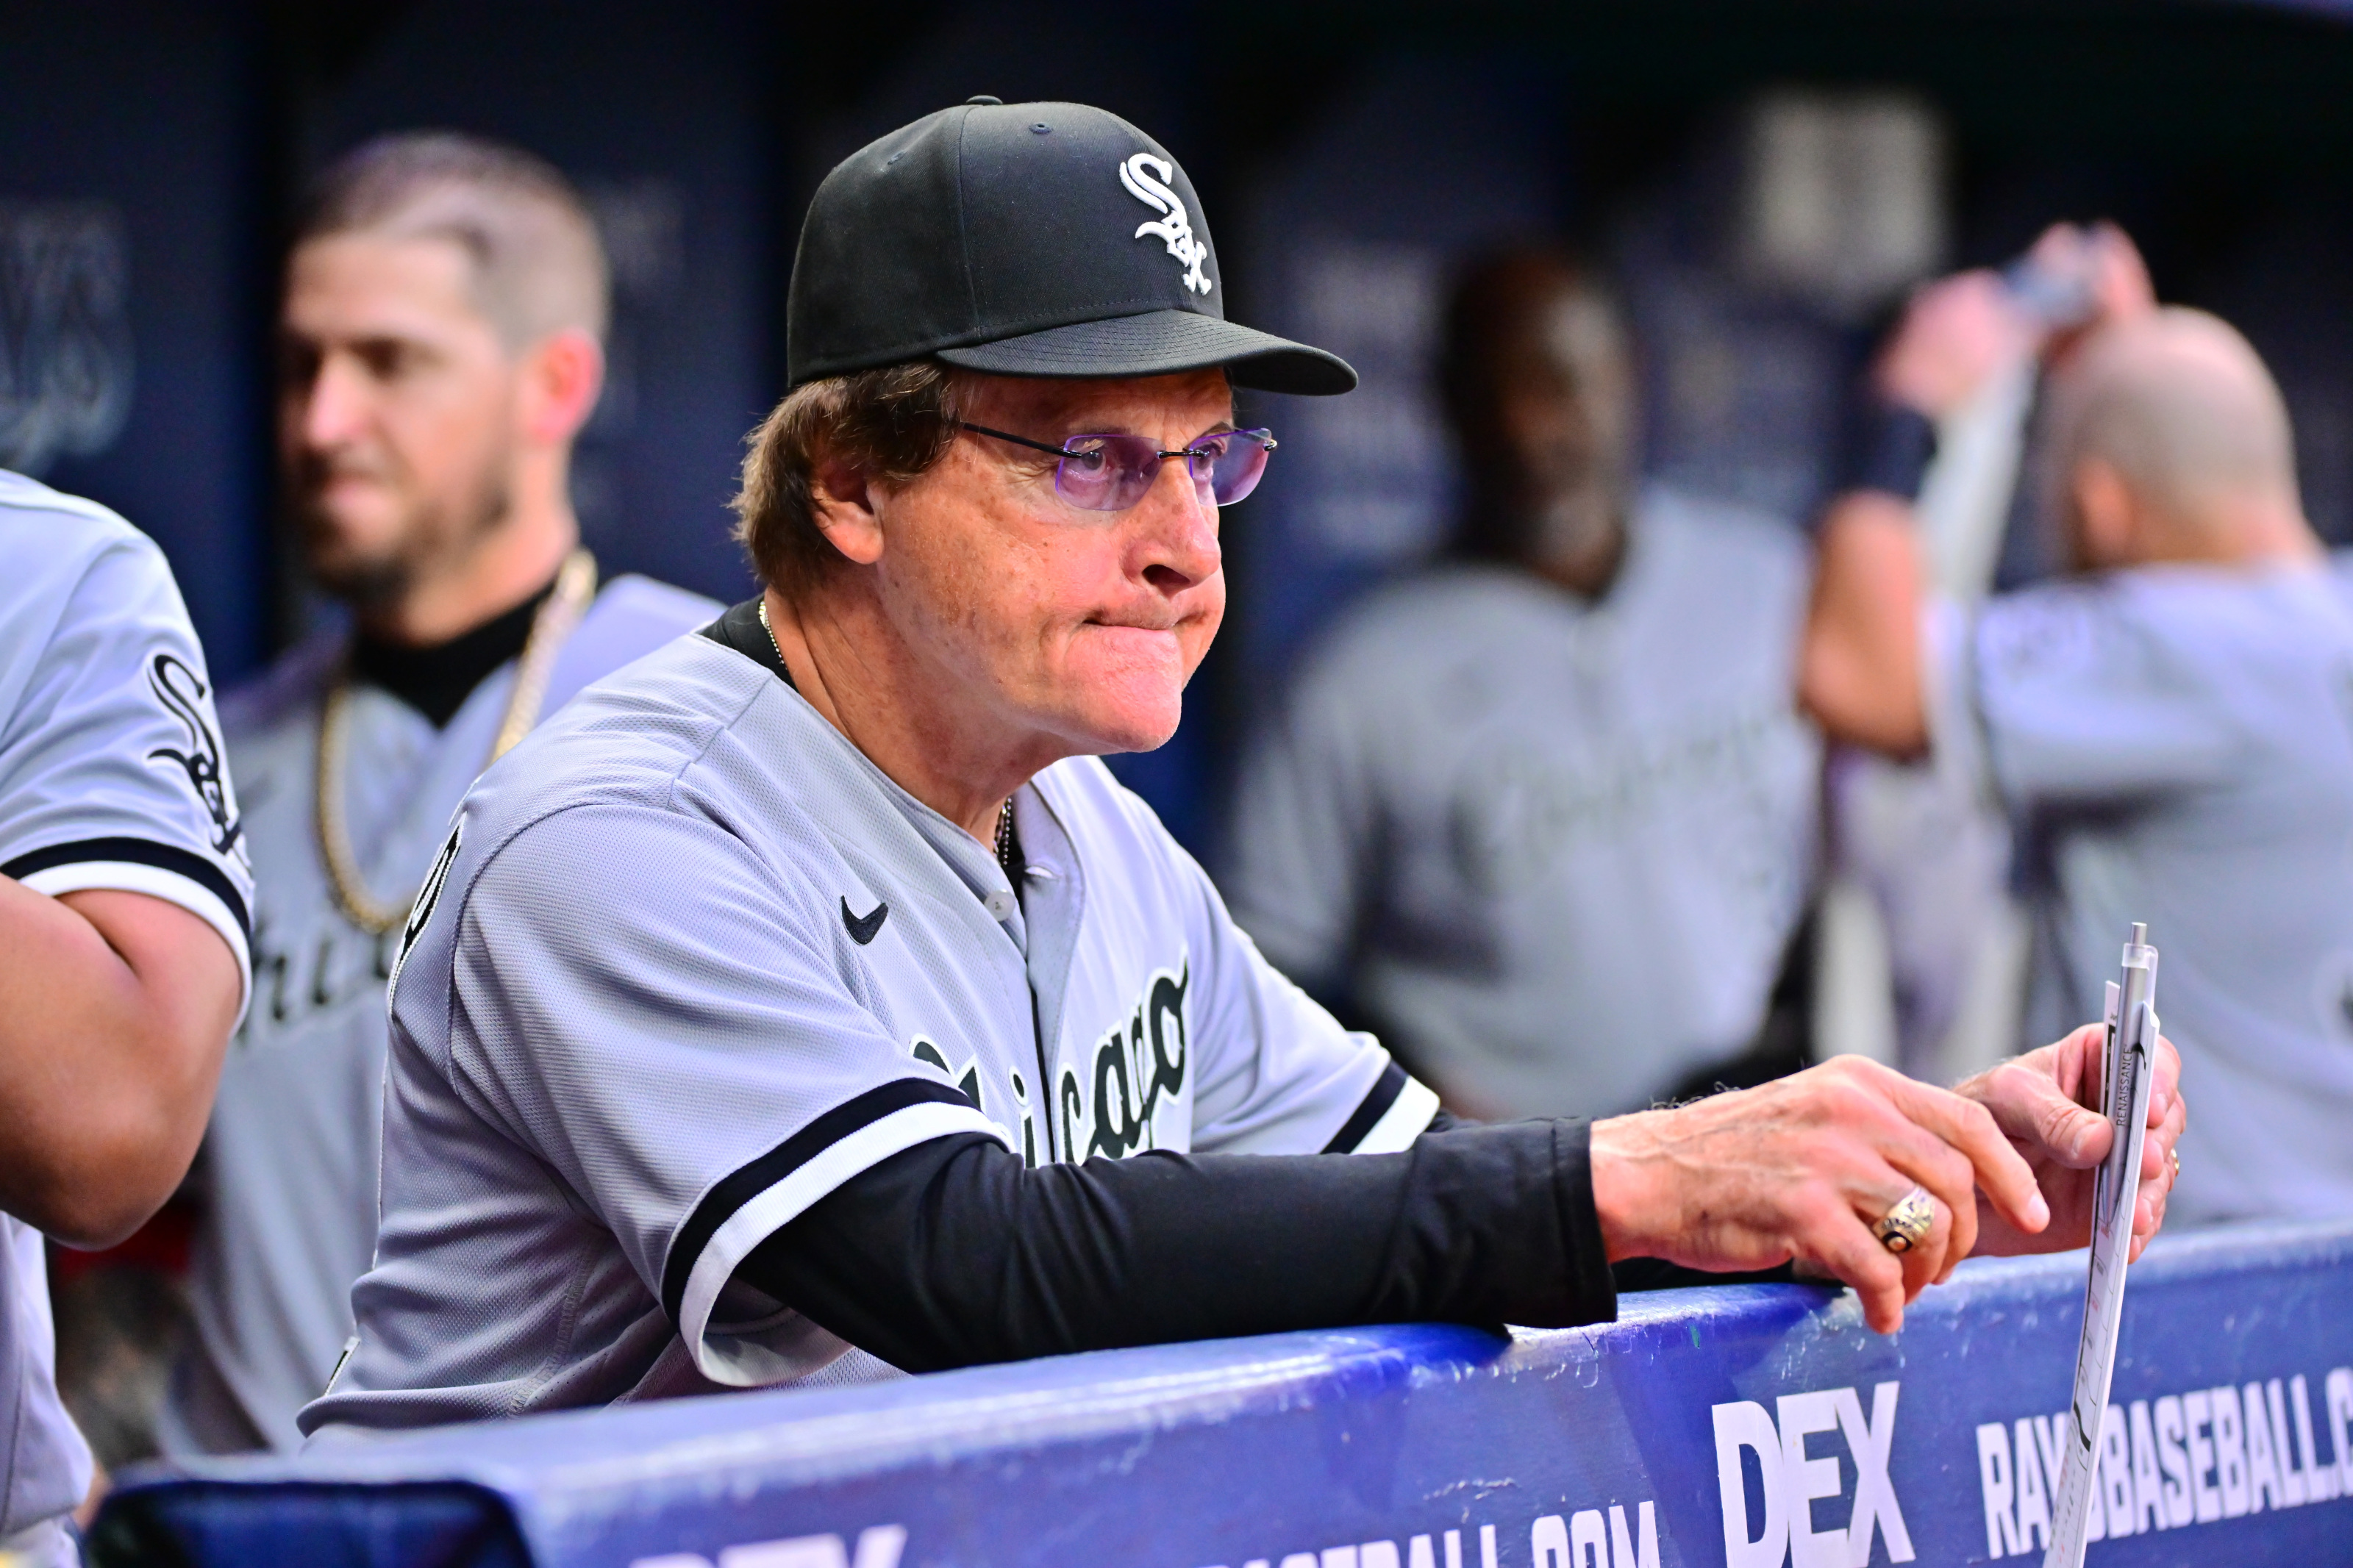 Chicago White Sox: If Tony La Russa wins, fans will take it all back